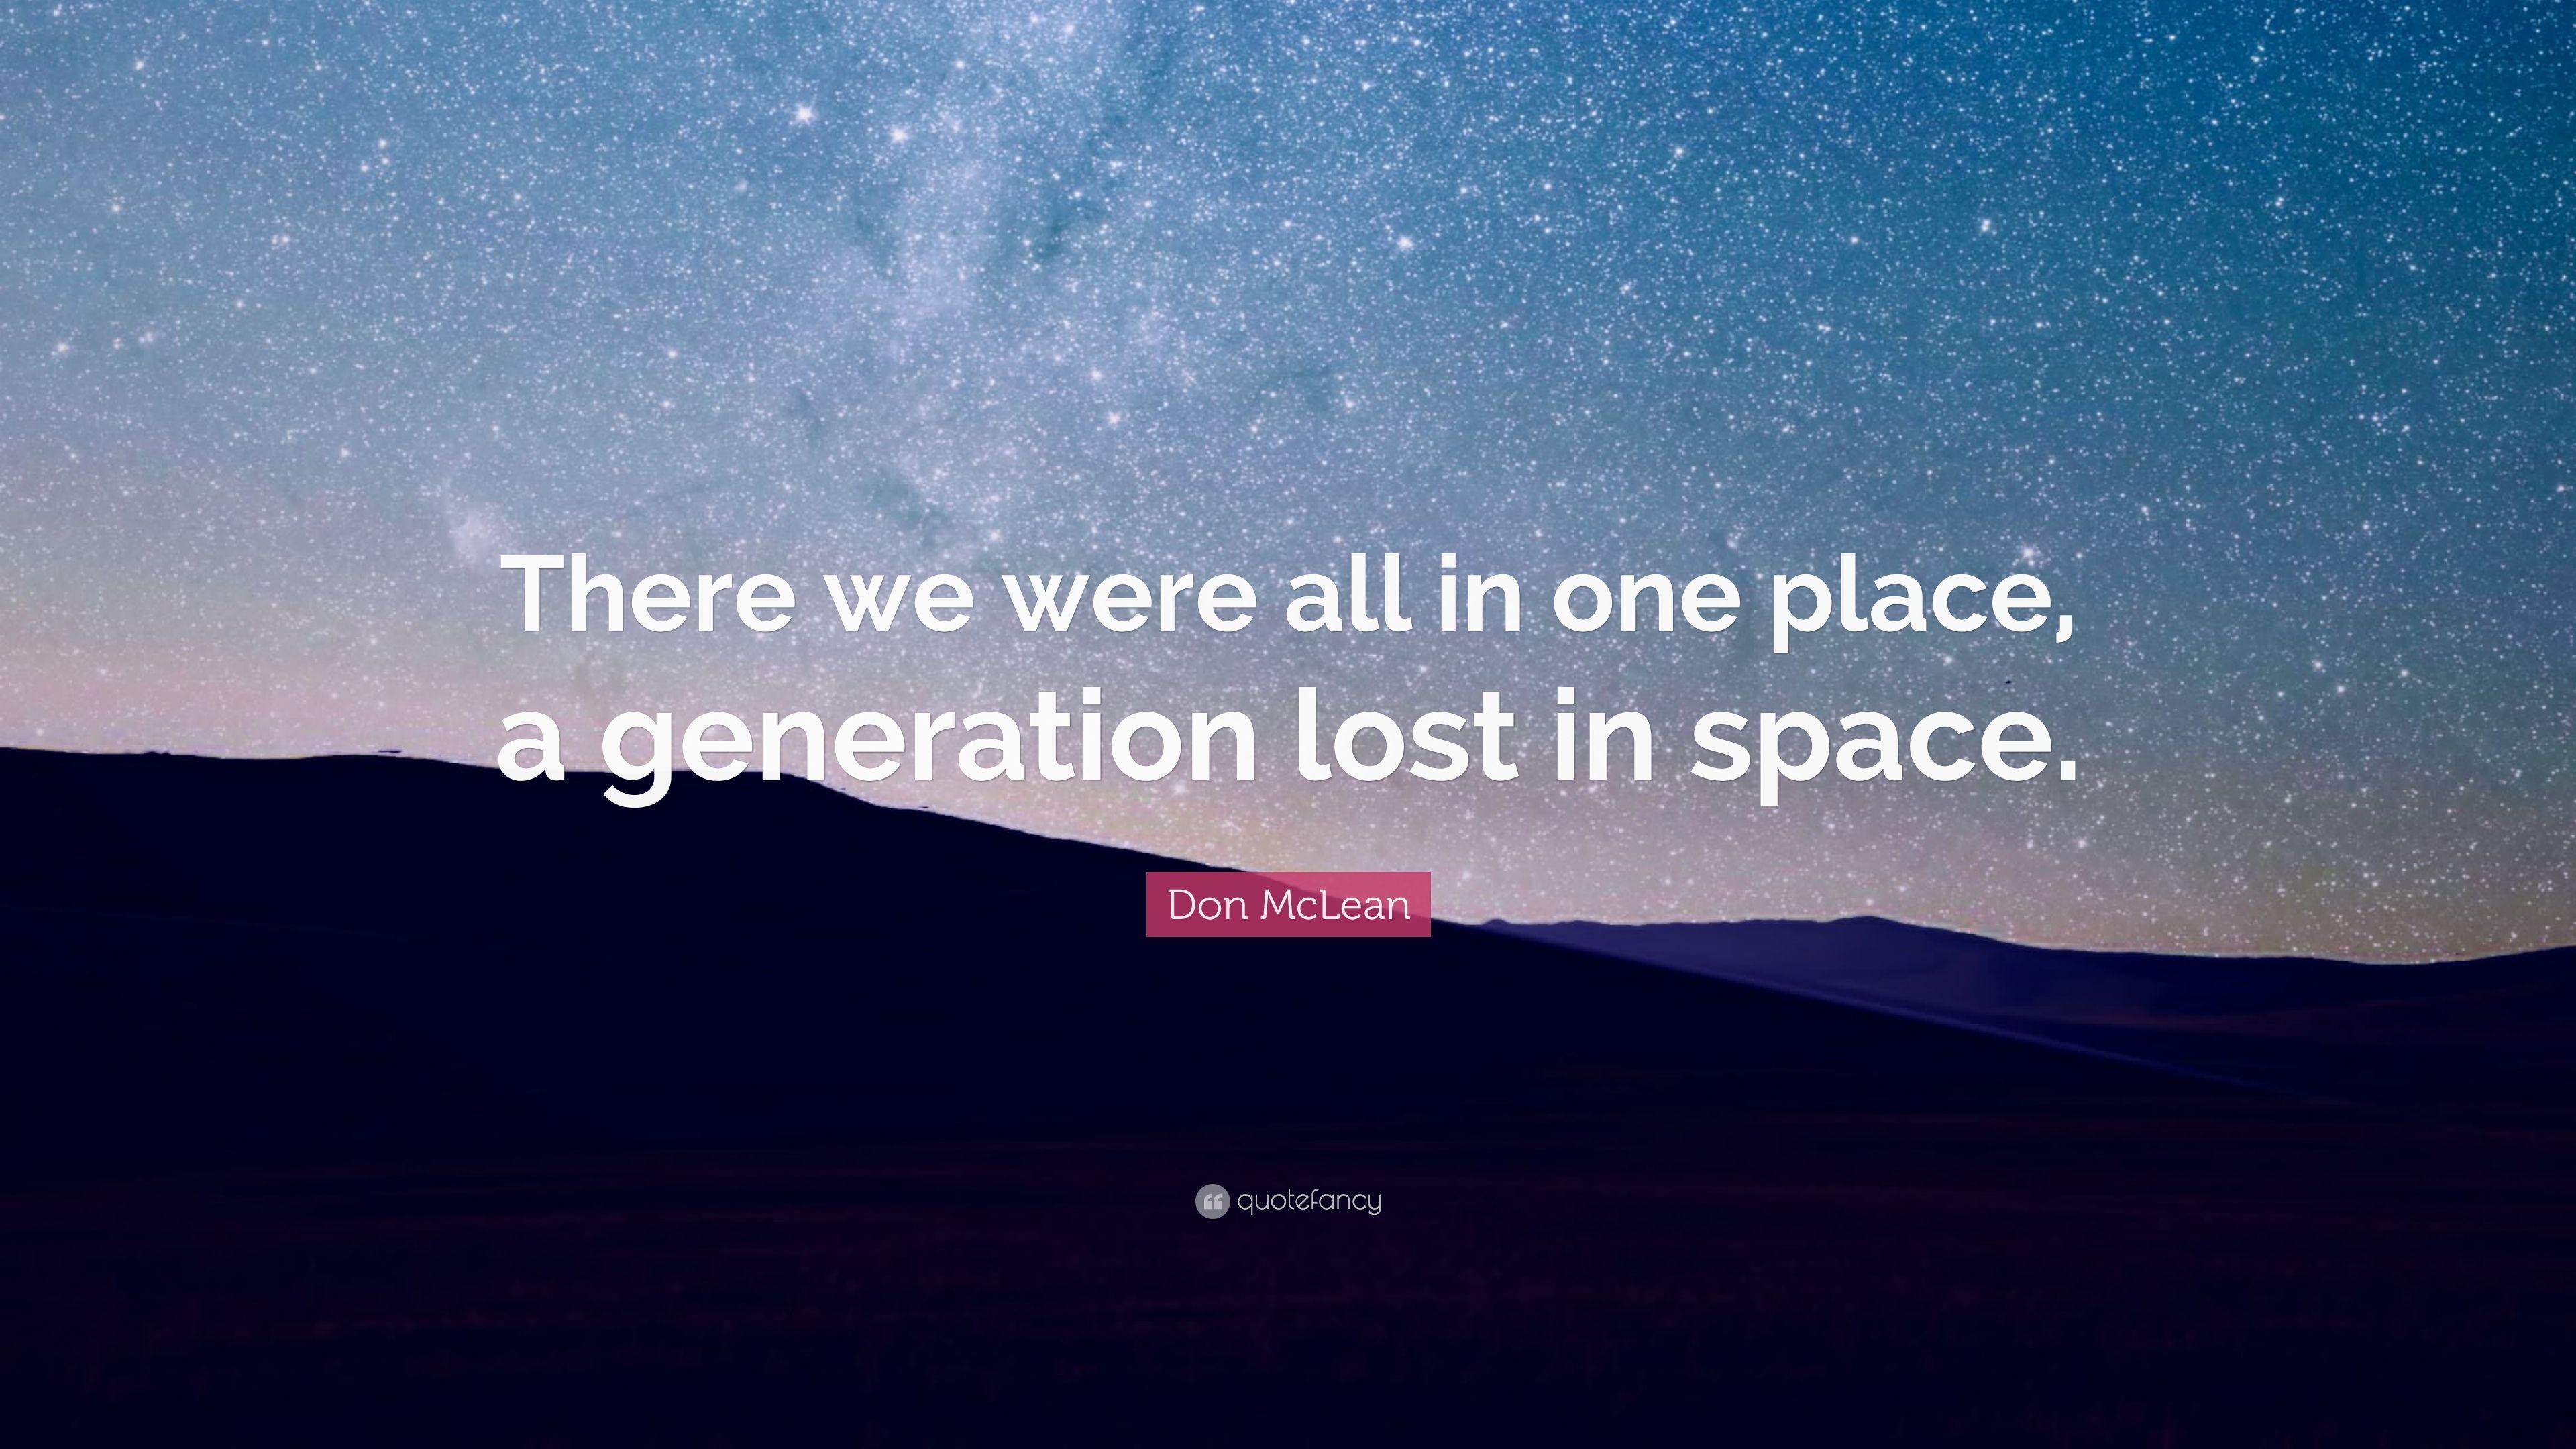 Don McLean Quote: “There we were all in one place, a generation lost